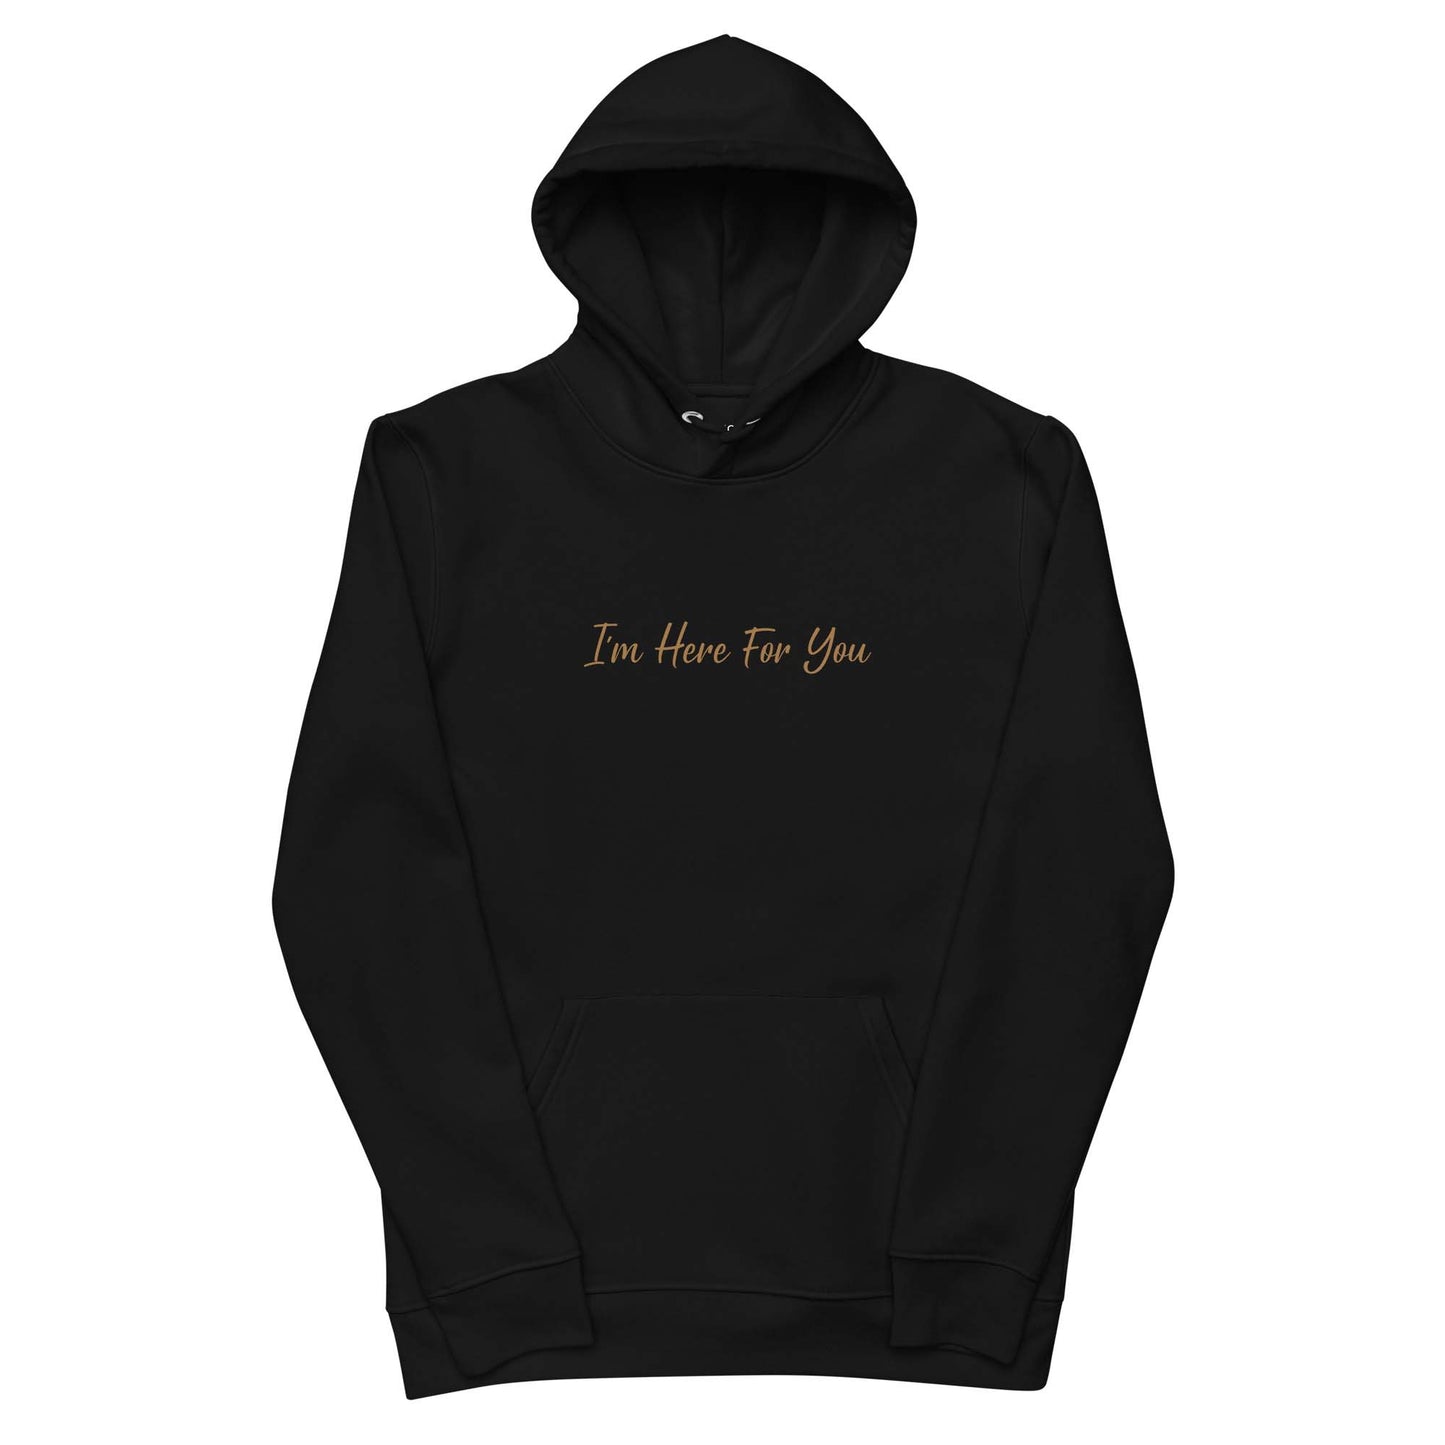 Men black organic hoodie with inspirational quote, "I'm Here For You."